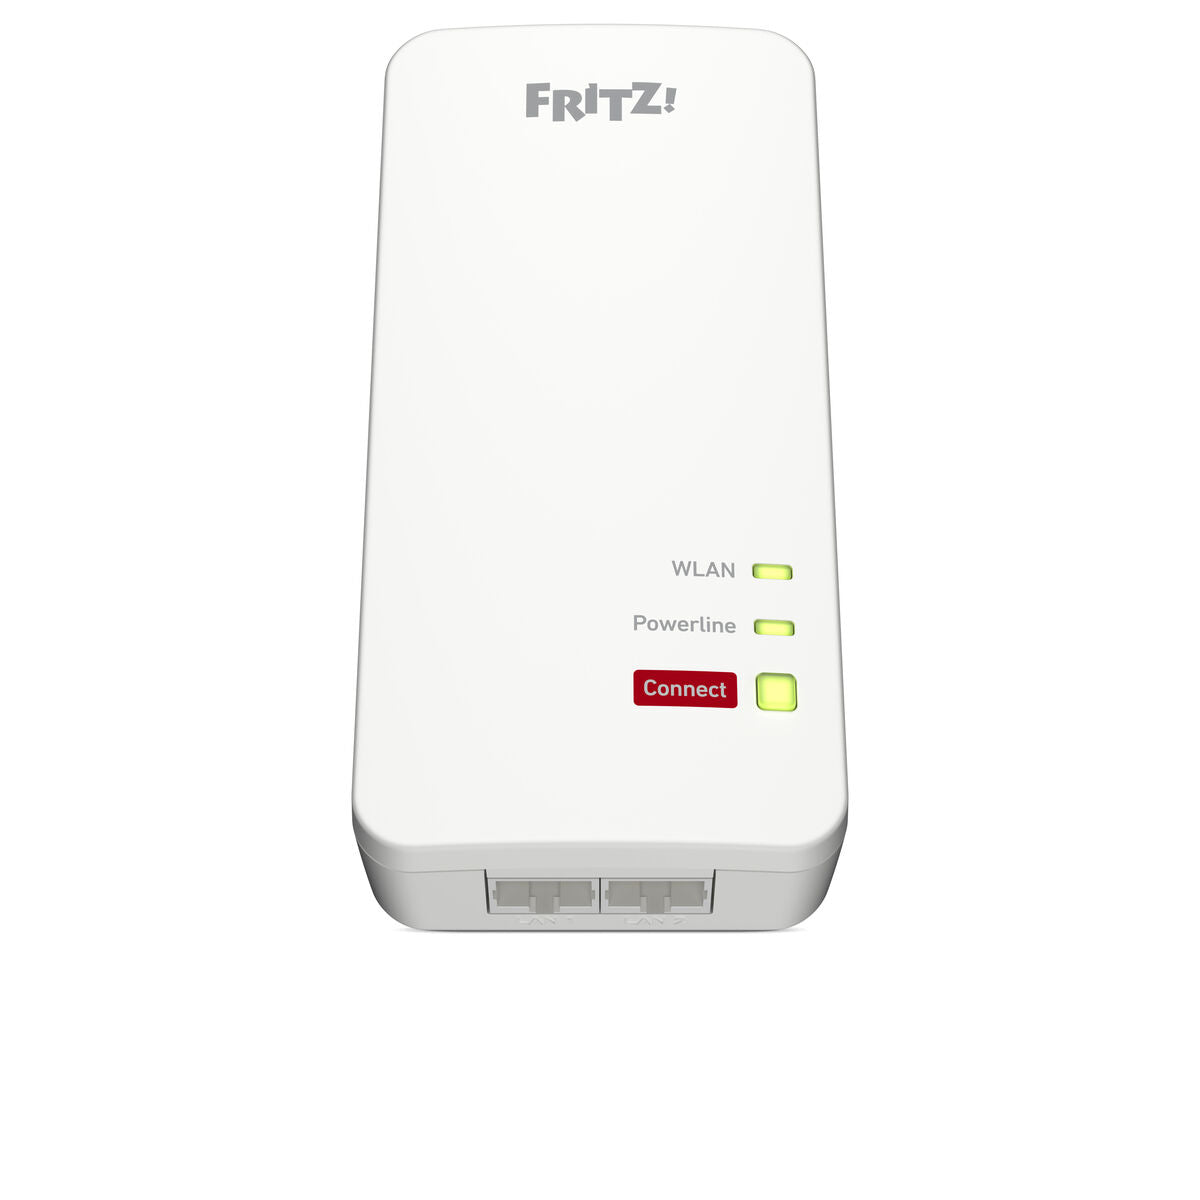 Access point Fritz! 20003038, Fritz!, Computing, Network devices, access-point-fritz-20003038, Brand_Fritz!, category-reference-2609, category-reference-2803, category-reference-2820, category-reference-t-19685, category-reference-t-19914, category-reference-t-21369, Condition_NEW, networks/wiring, Price_100 - 200, Teleworking, RiotNook